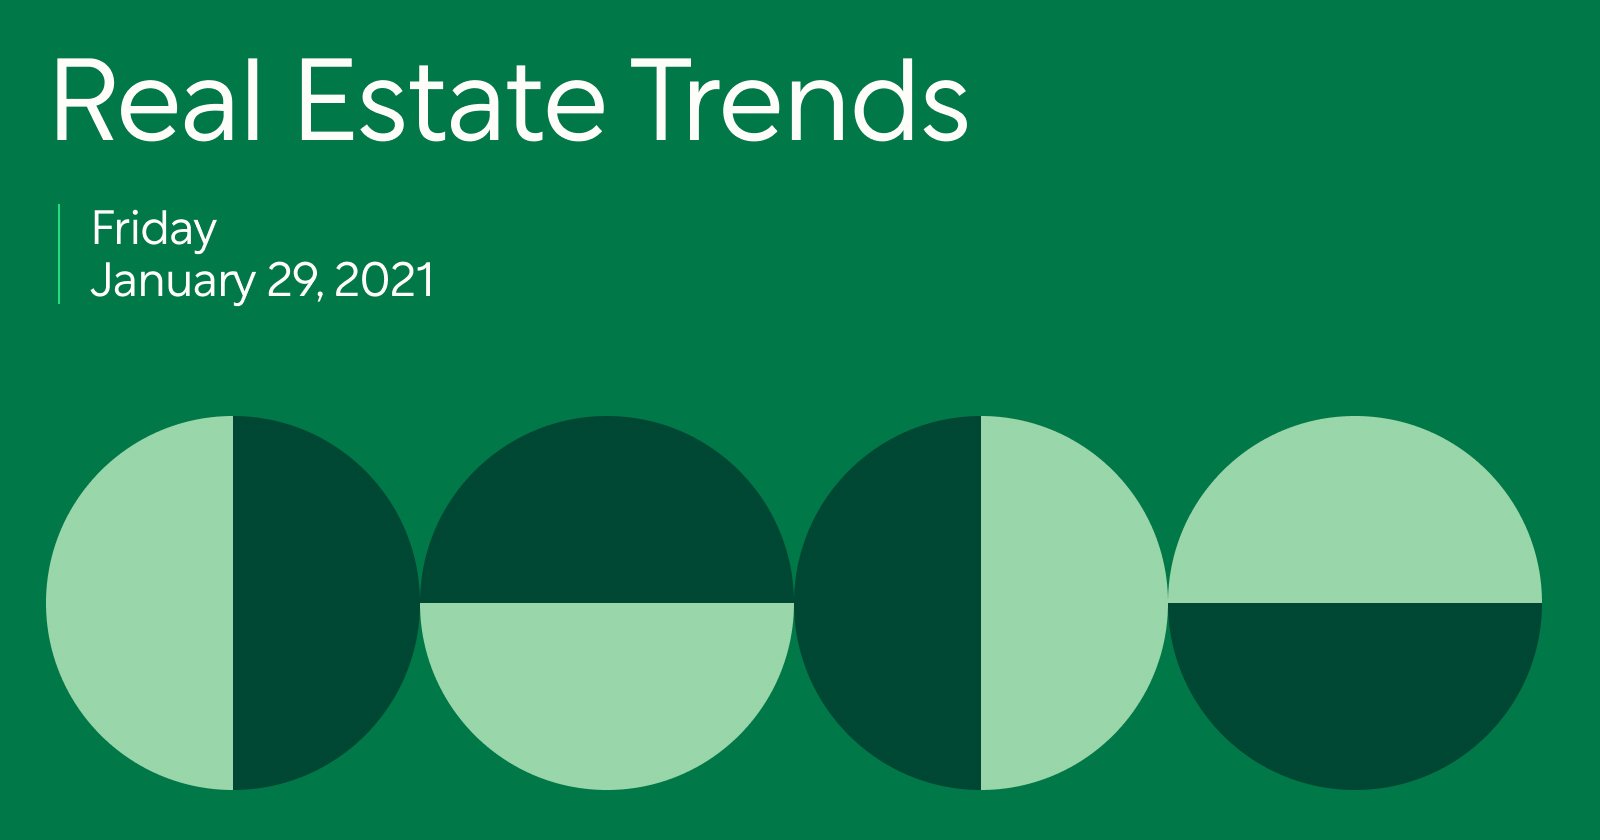 Real Estate Trends 1/29/20: Real Estate Trends for 2021 Offer Agents Some Buyer Retention Insights